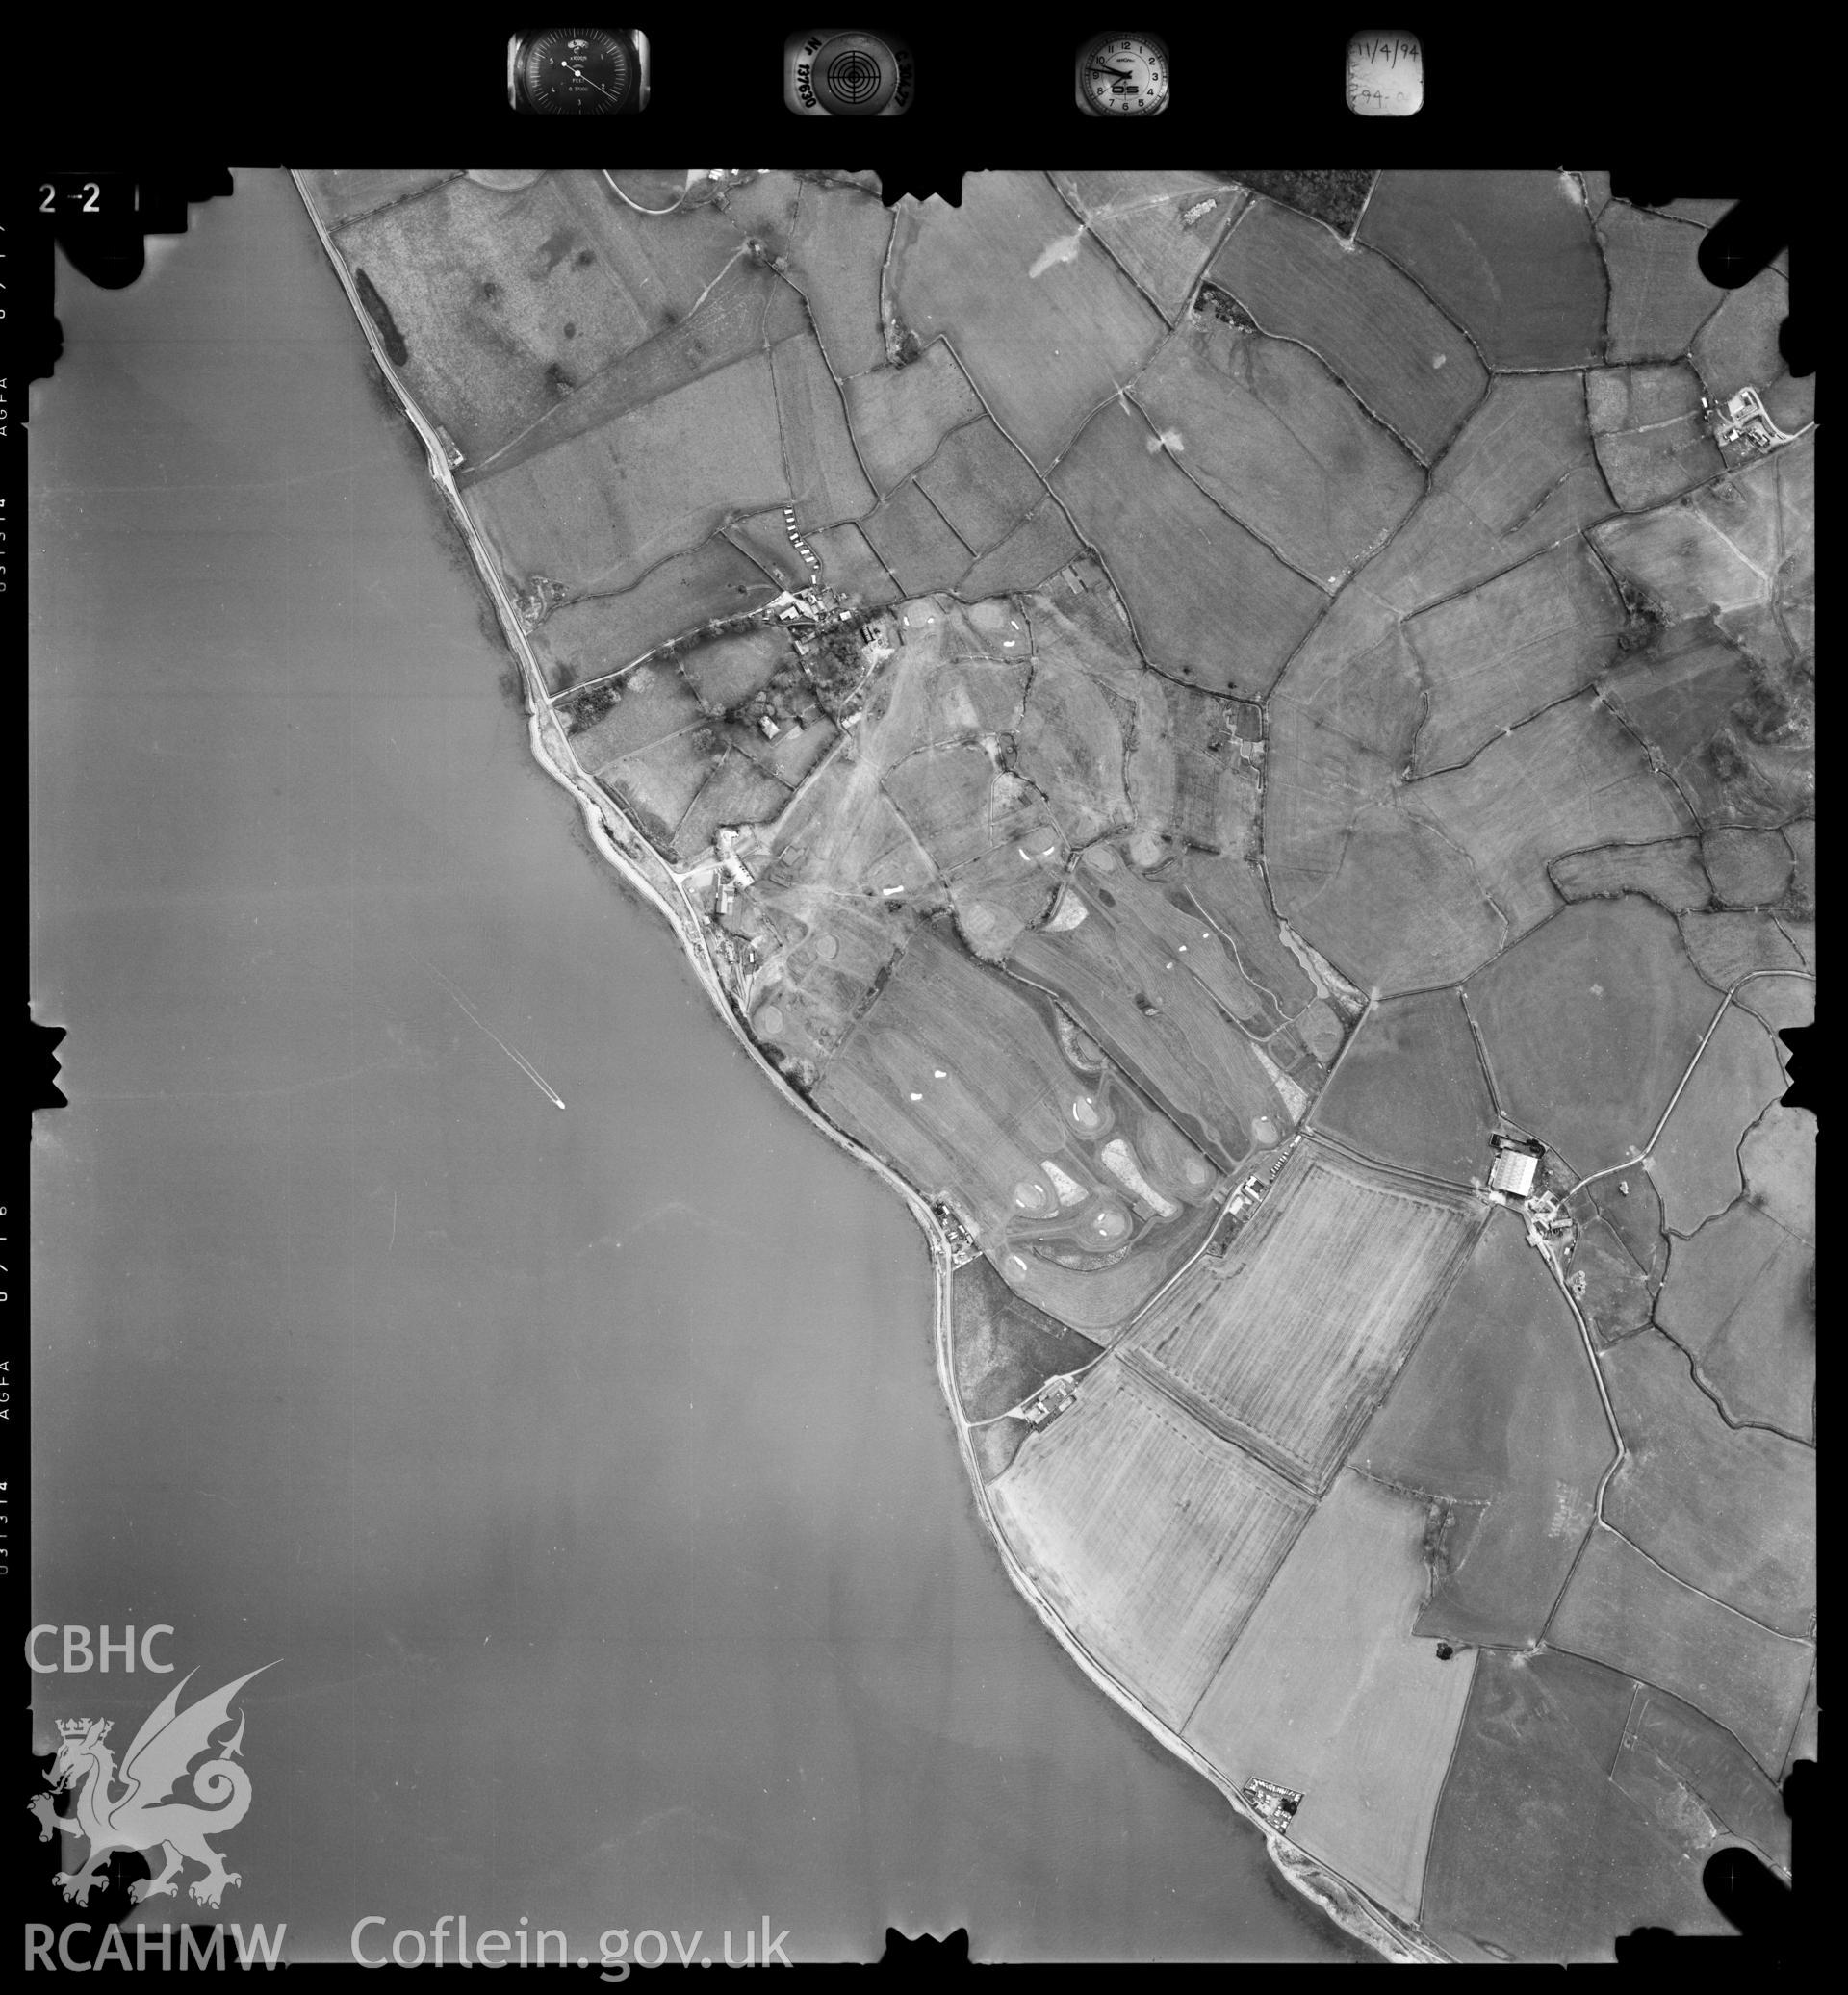 Digitized copy of an aerial photograph showing the Menai Straits area, taken by Ordnance Survey, 1994.